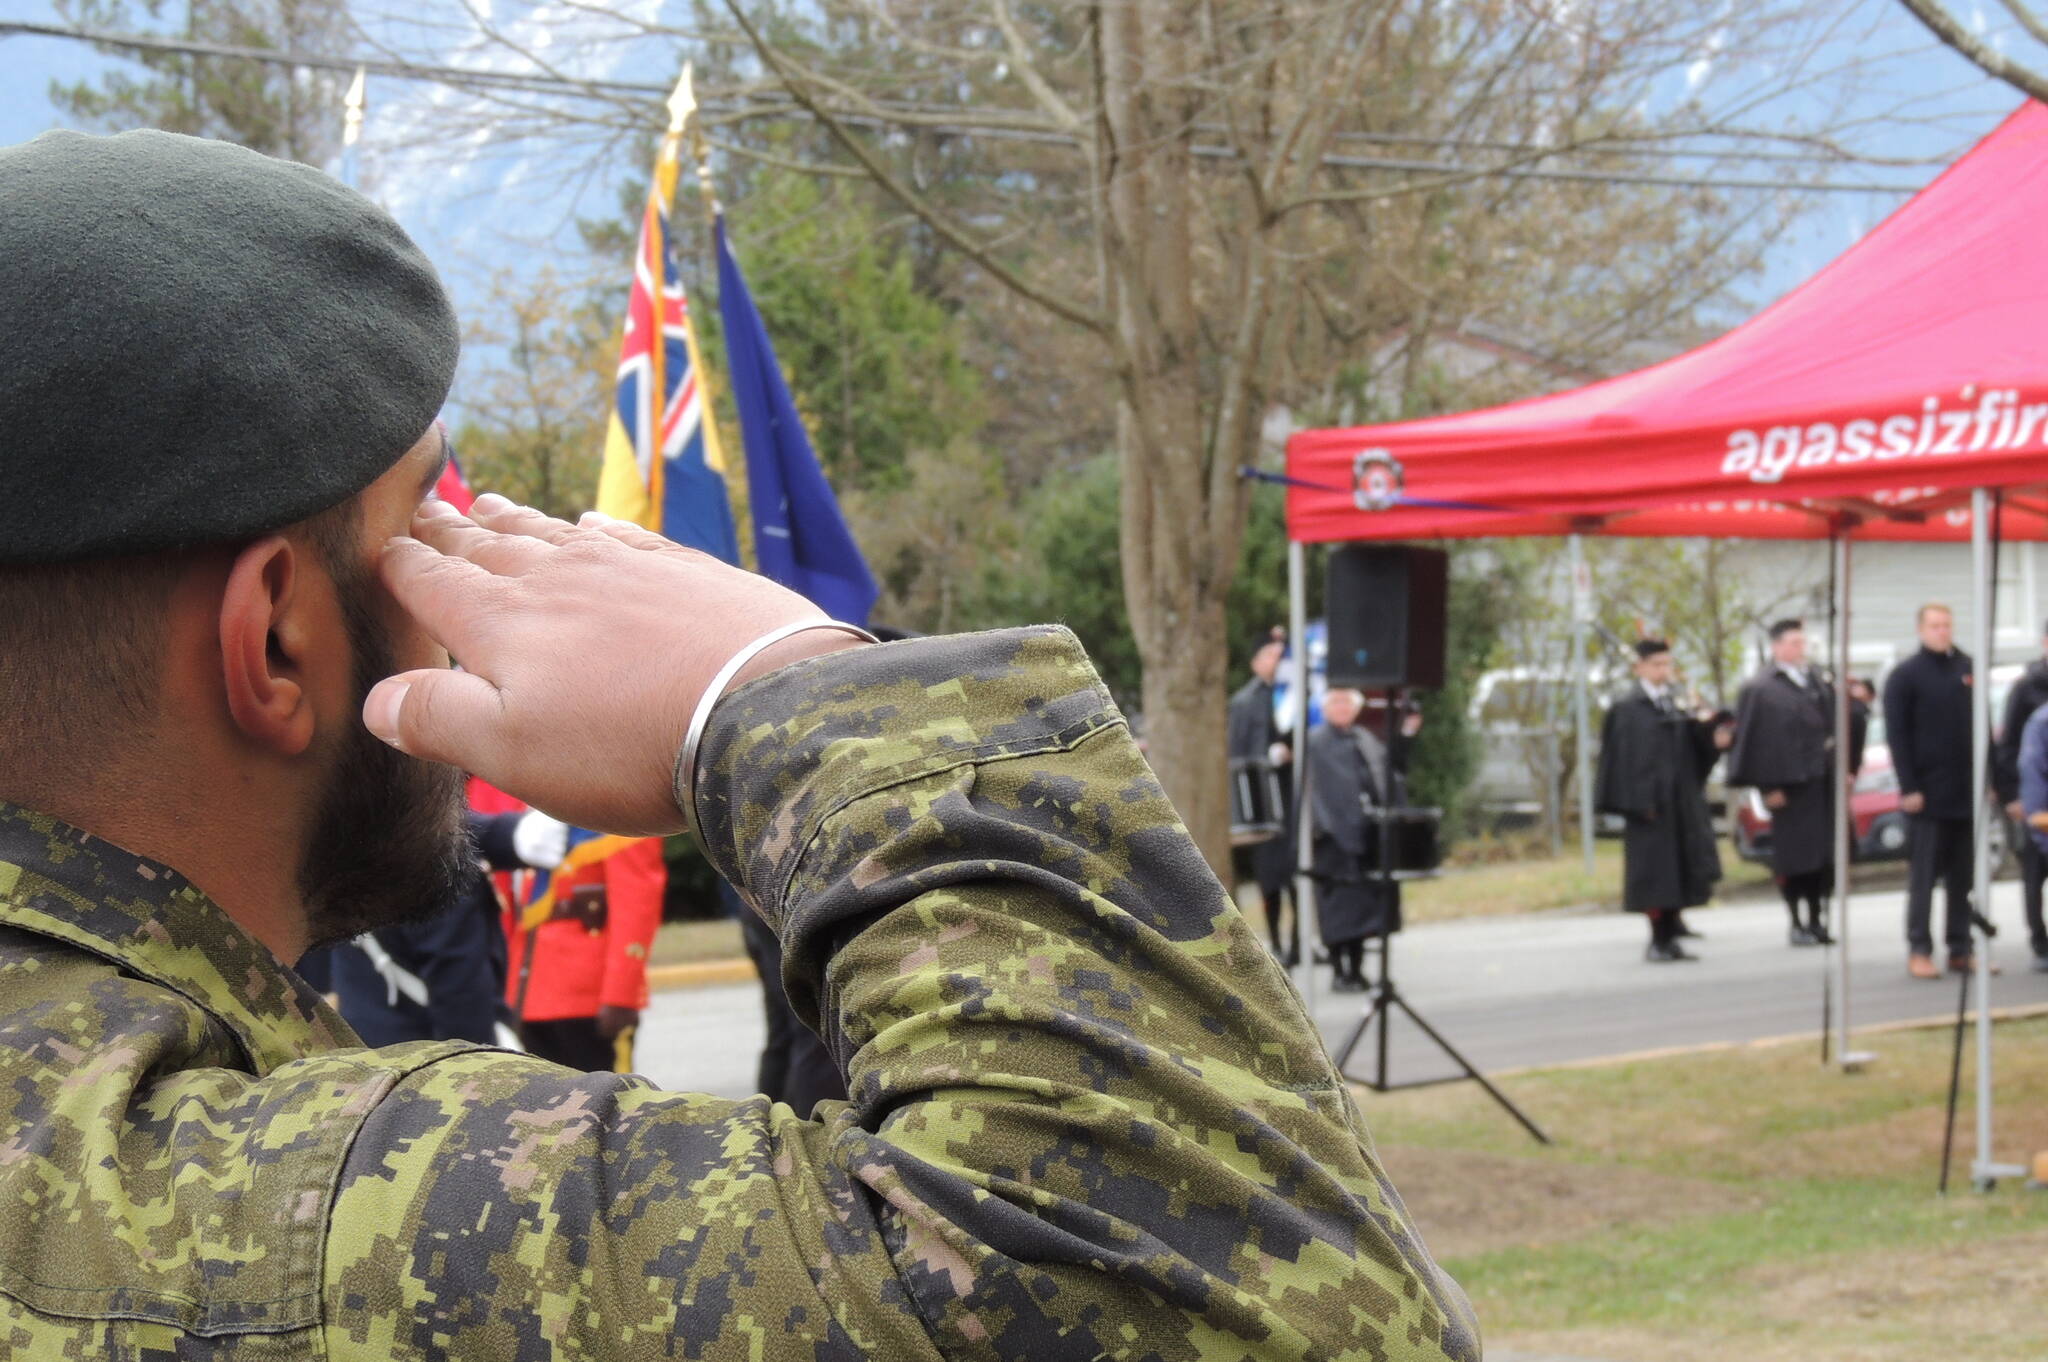 30983214_web1_221118-AHO-Remembrance-Day-Photos_13